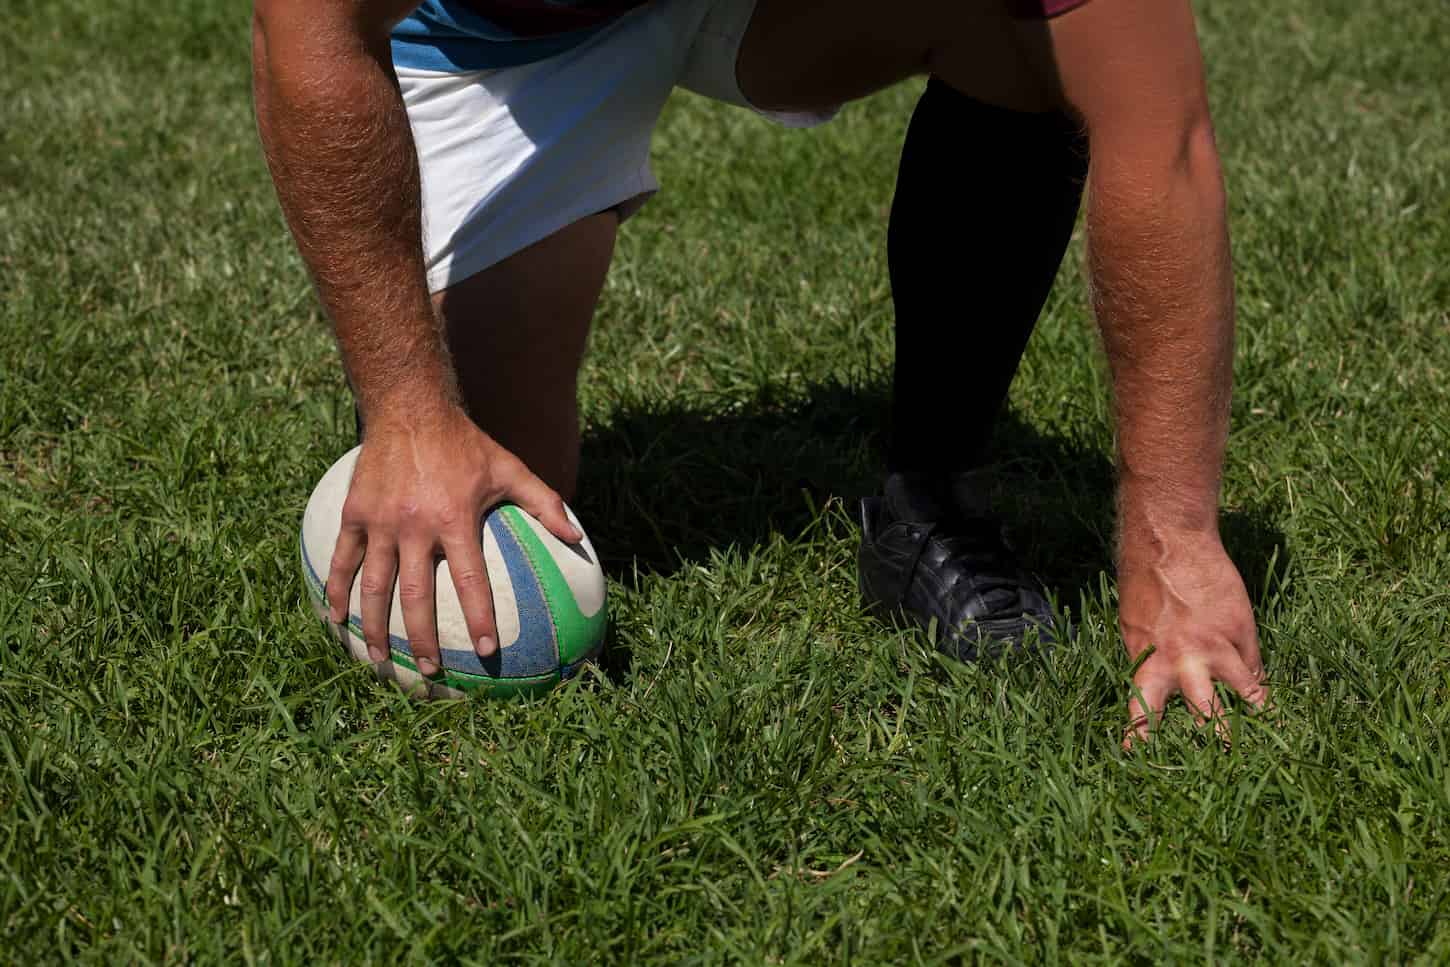 An image of a Player crouching with rugby ball on field.